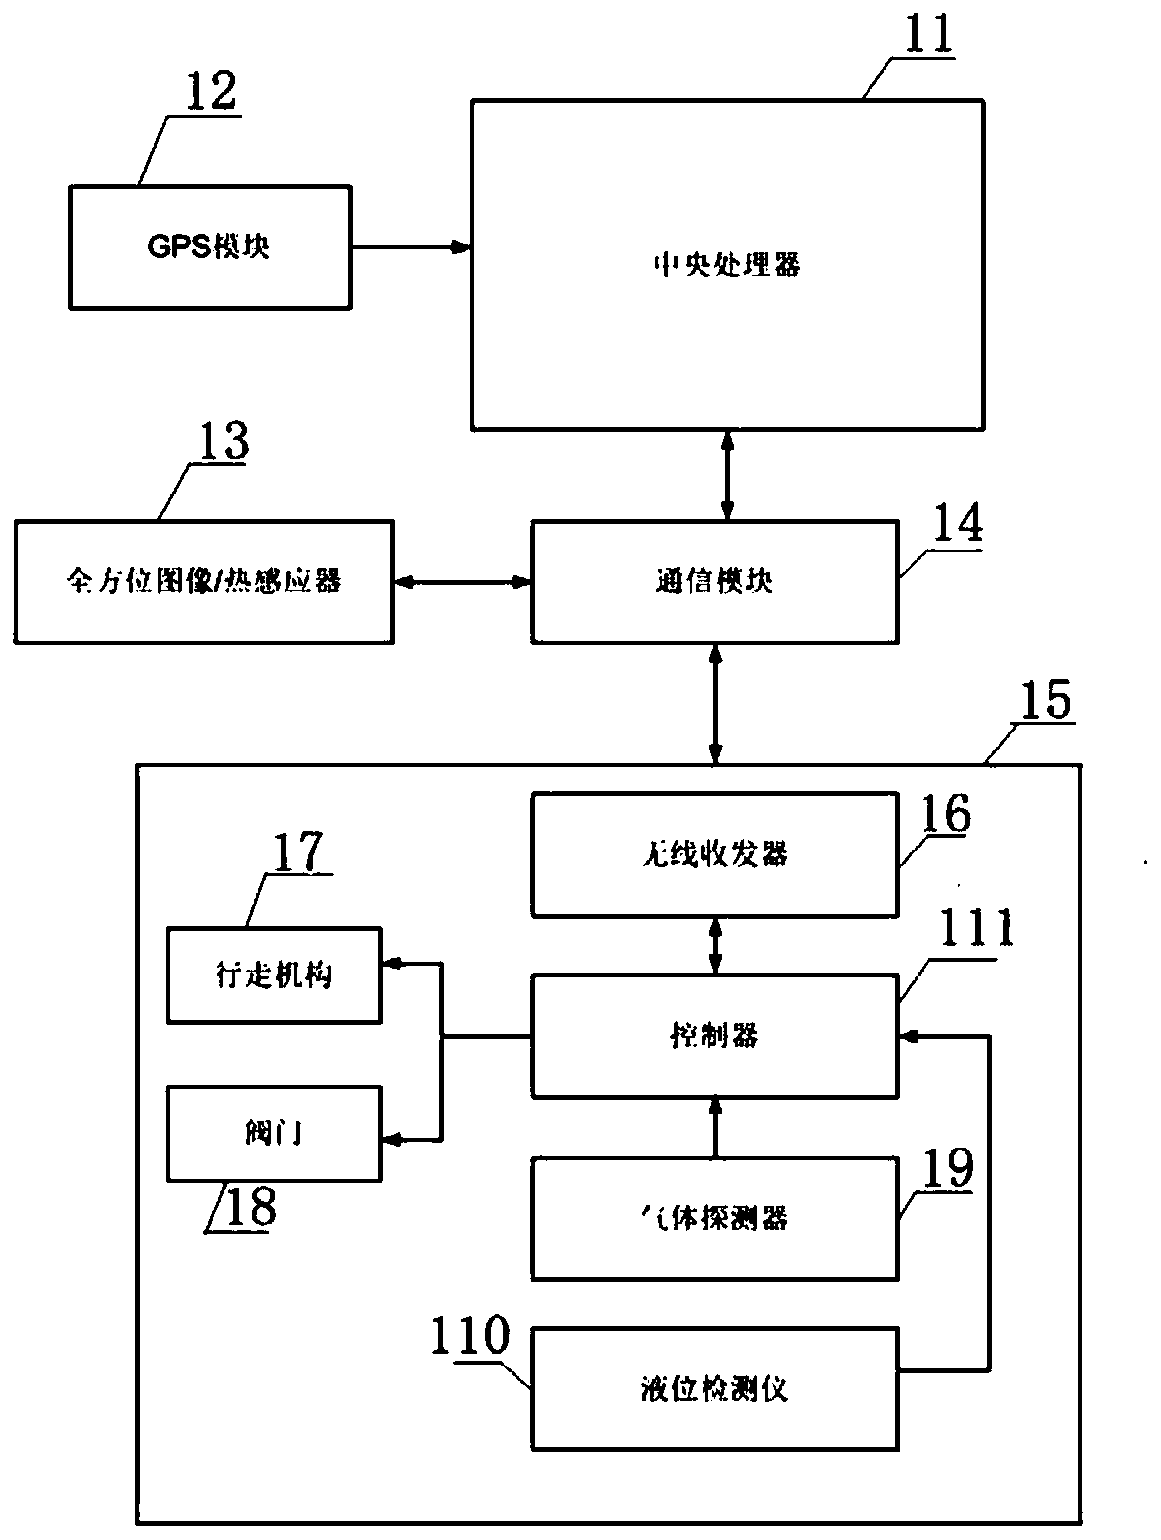 Power transmission line fault monitoring device and method